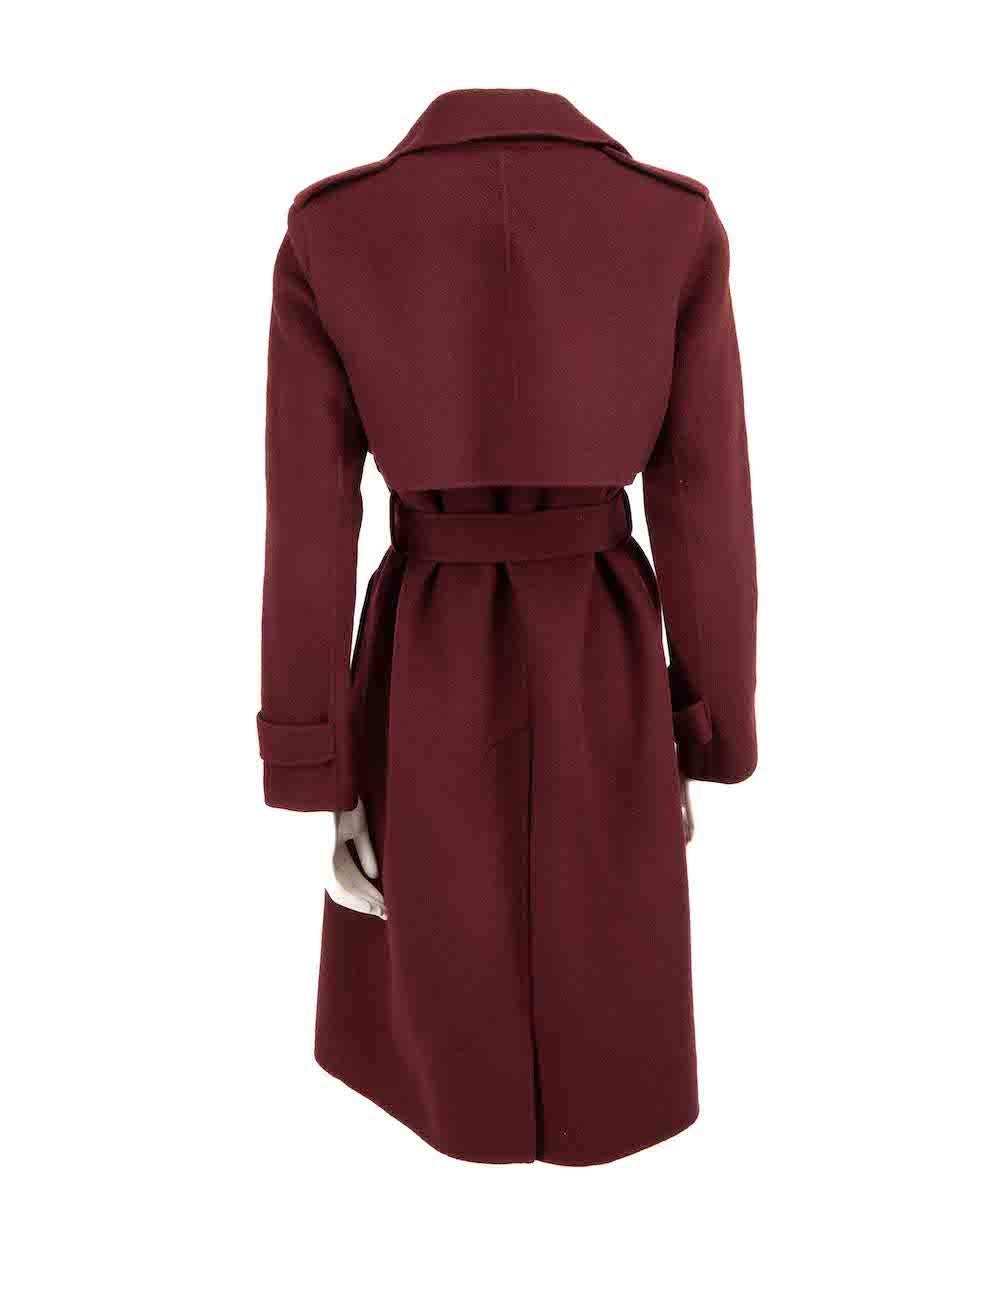 Theory Burgundy Wool Belted Midi Coat Size S In Good Condition For Sale In London, GB